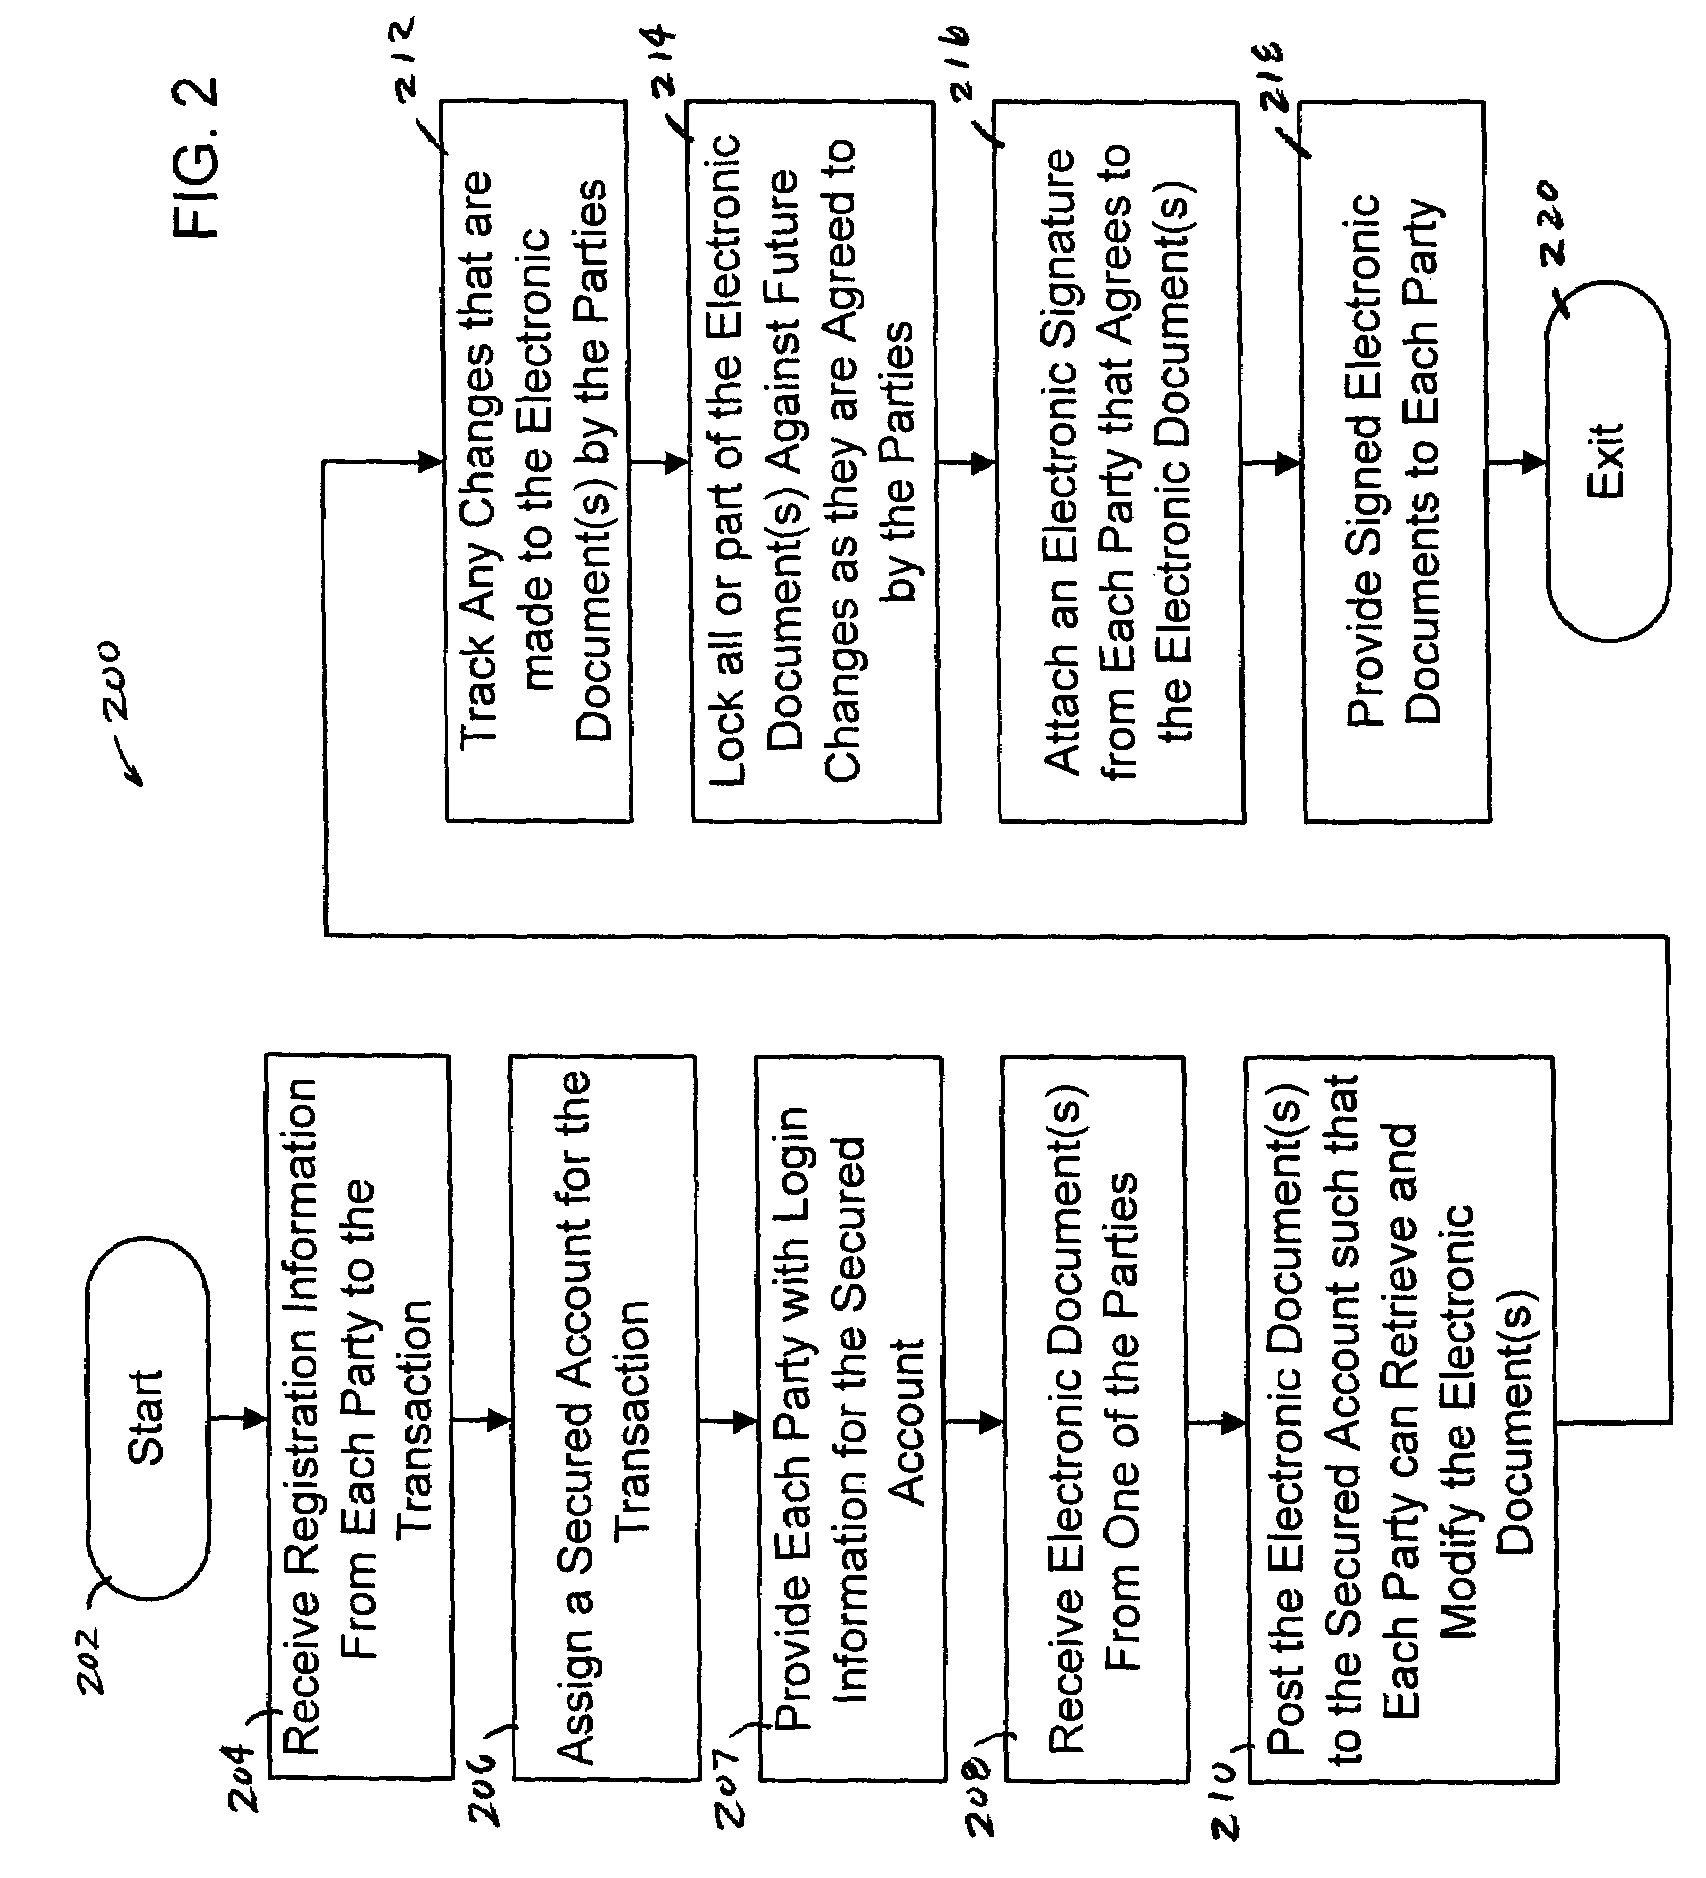 System and method for facilitating transactions between two or more parties